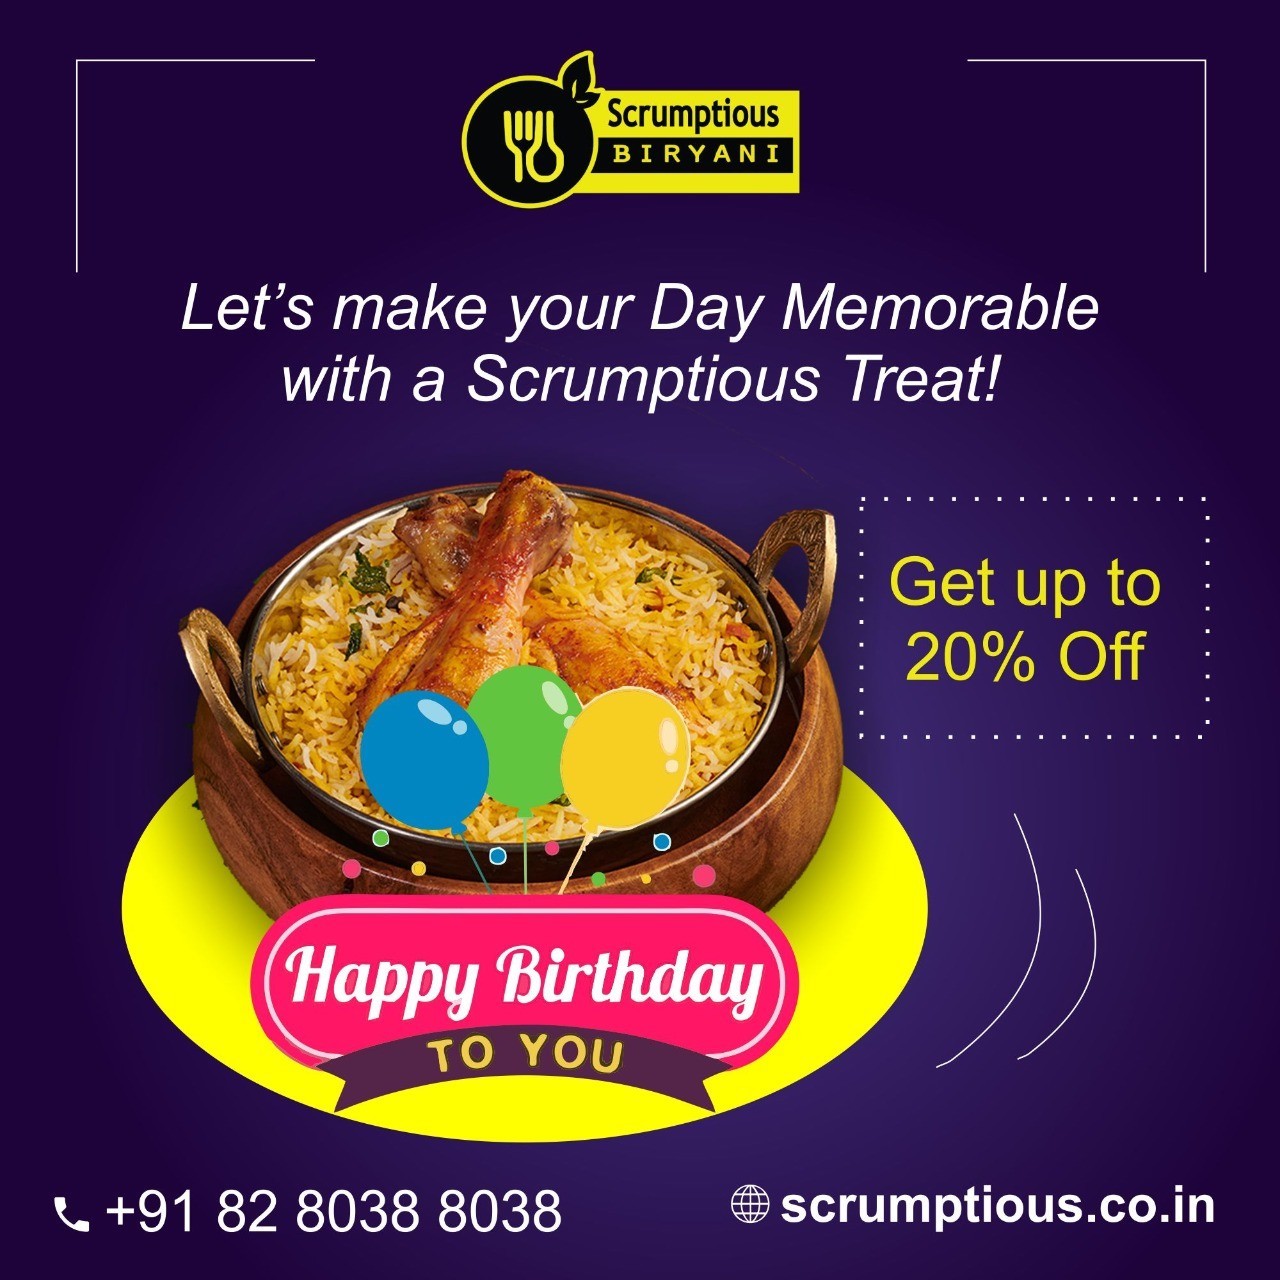 Let's make your day memorable with a Scrumptious Treat!